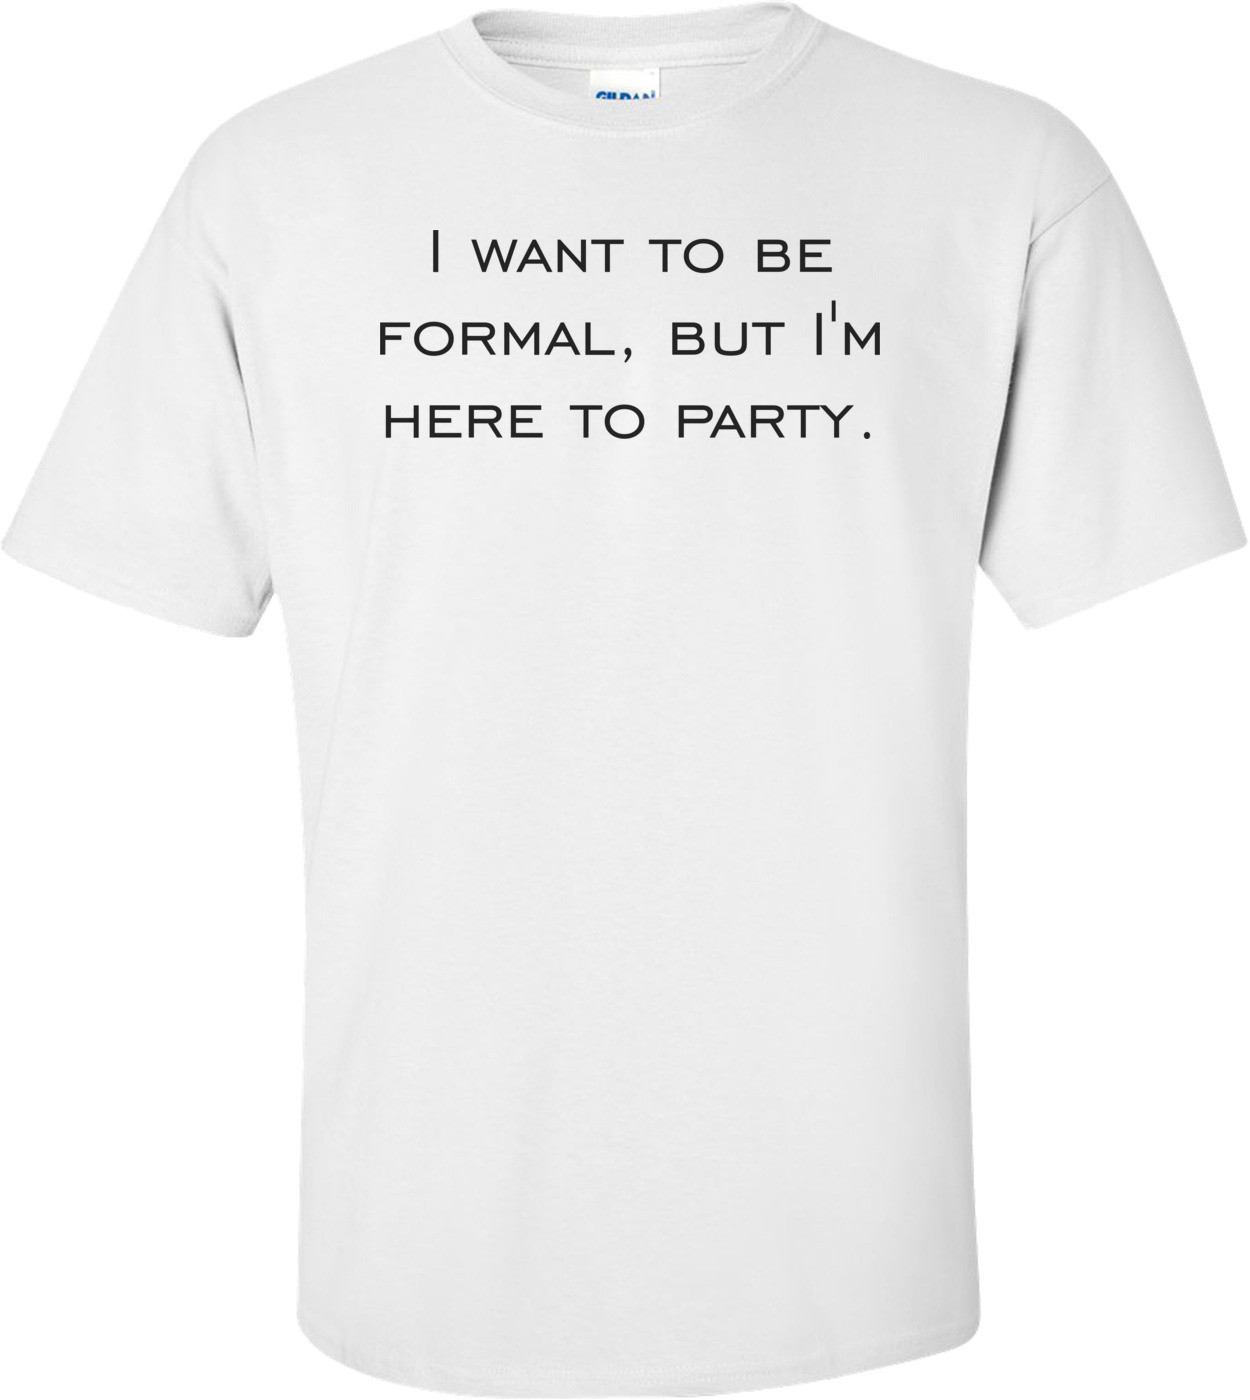 I want to be formal, but I'm here to party. Shirt